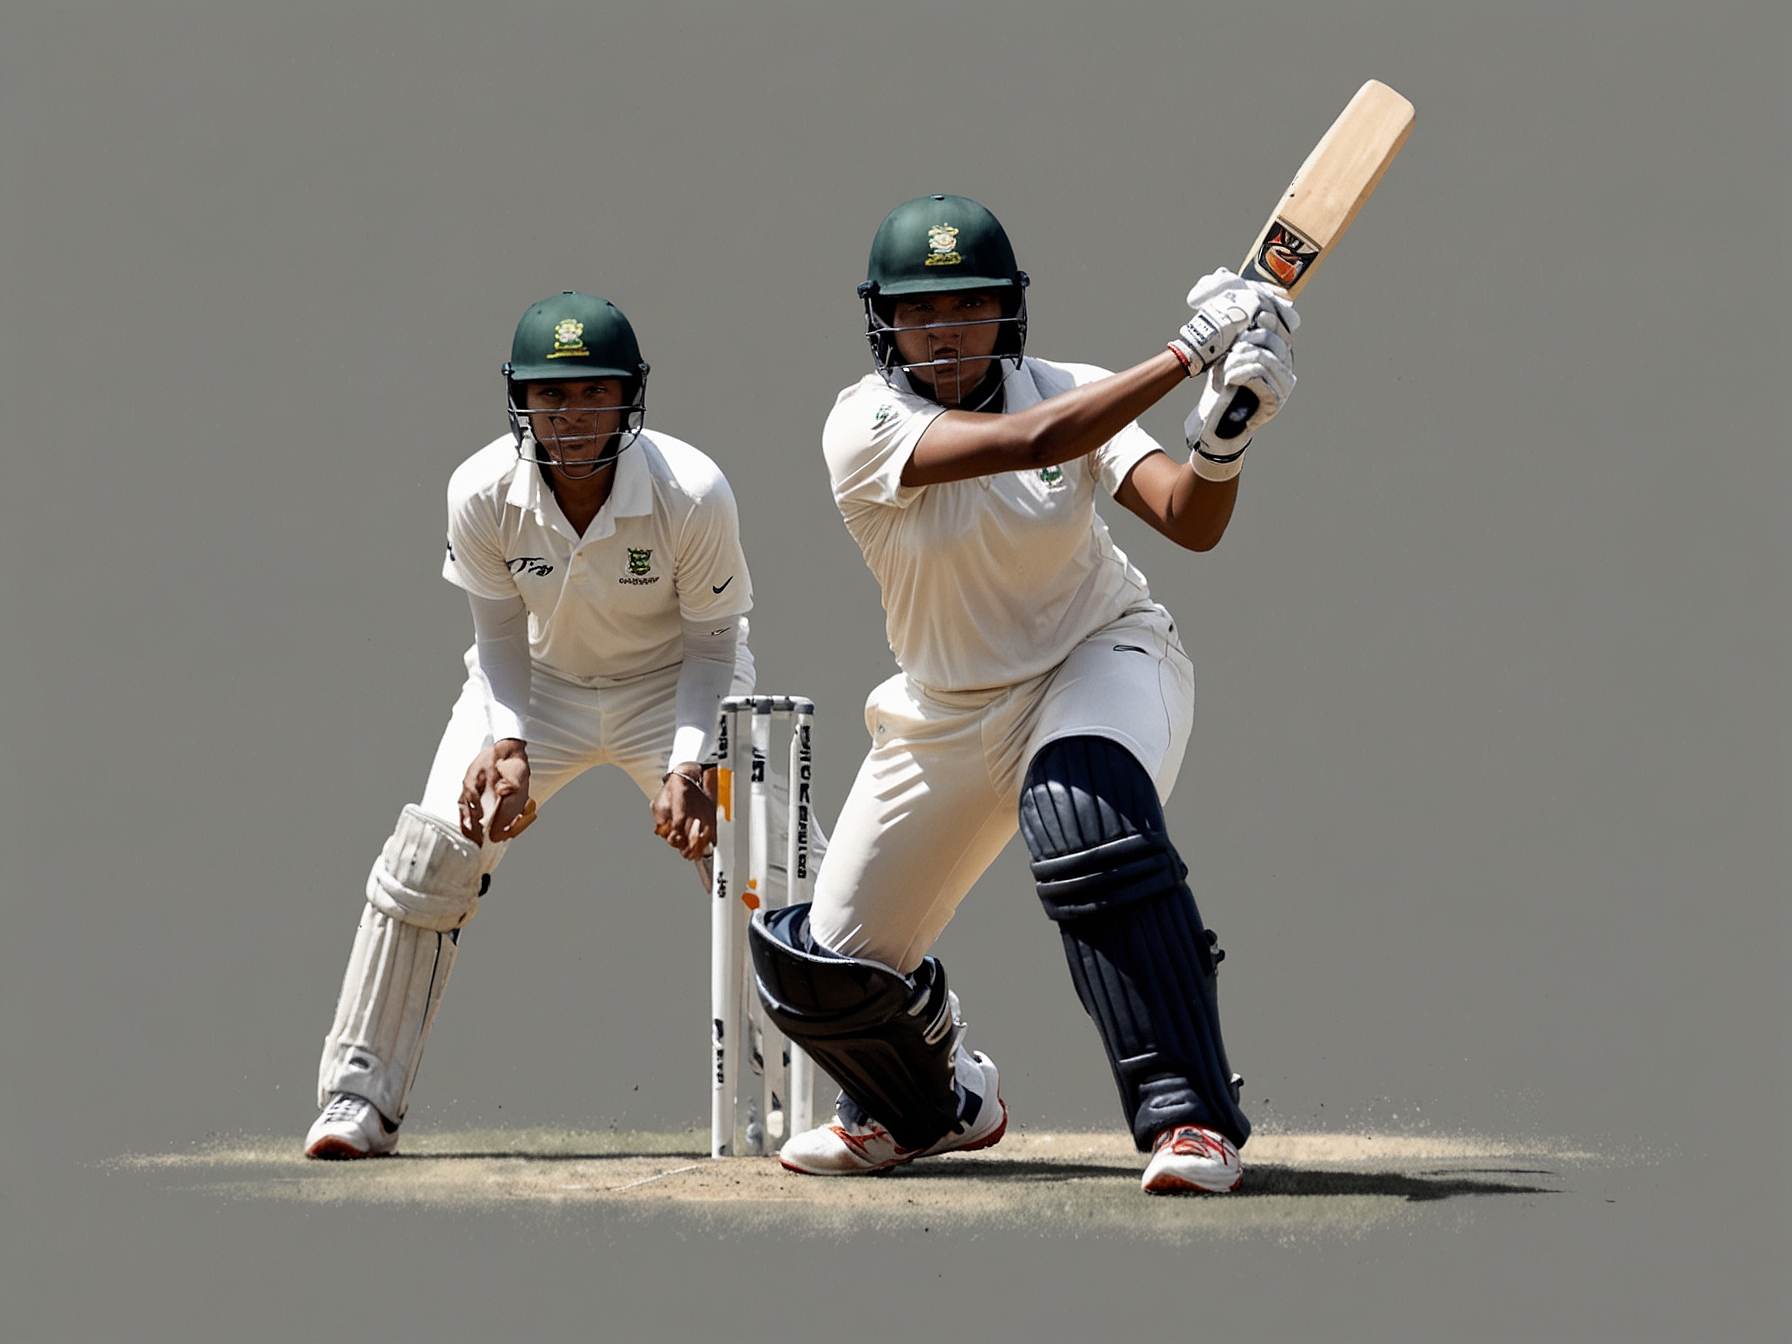 South Africa Women's middle-order batter attempts to stabilize the innings, facing disciplined Indian bowling and aiming to bridge the 367-run deficit in a highly competitive match.